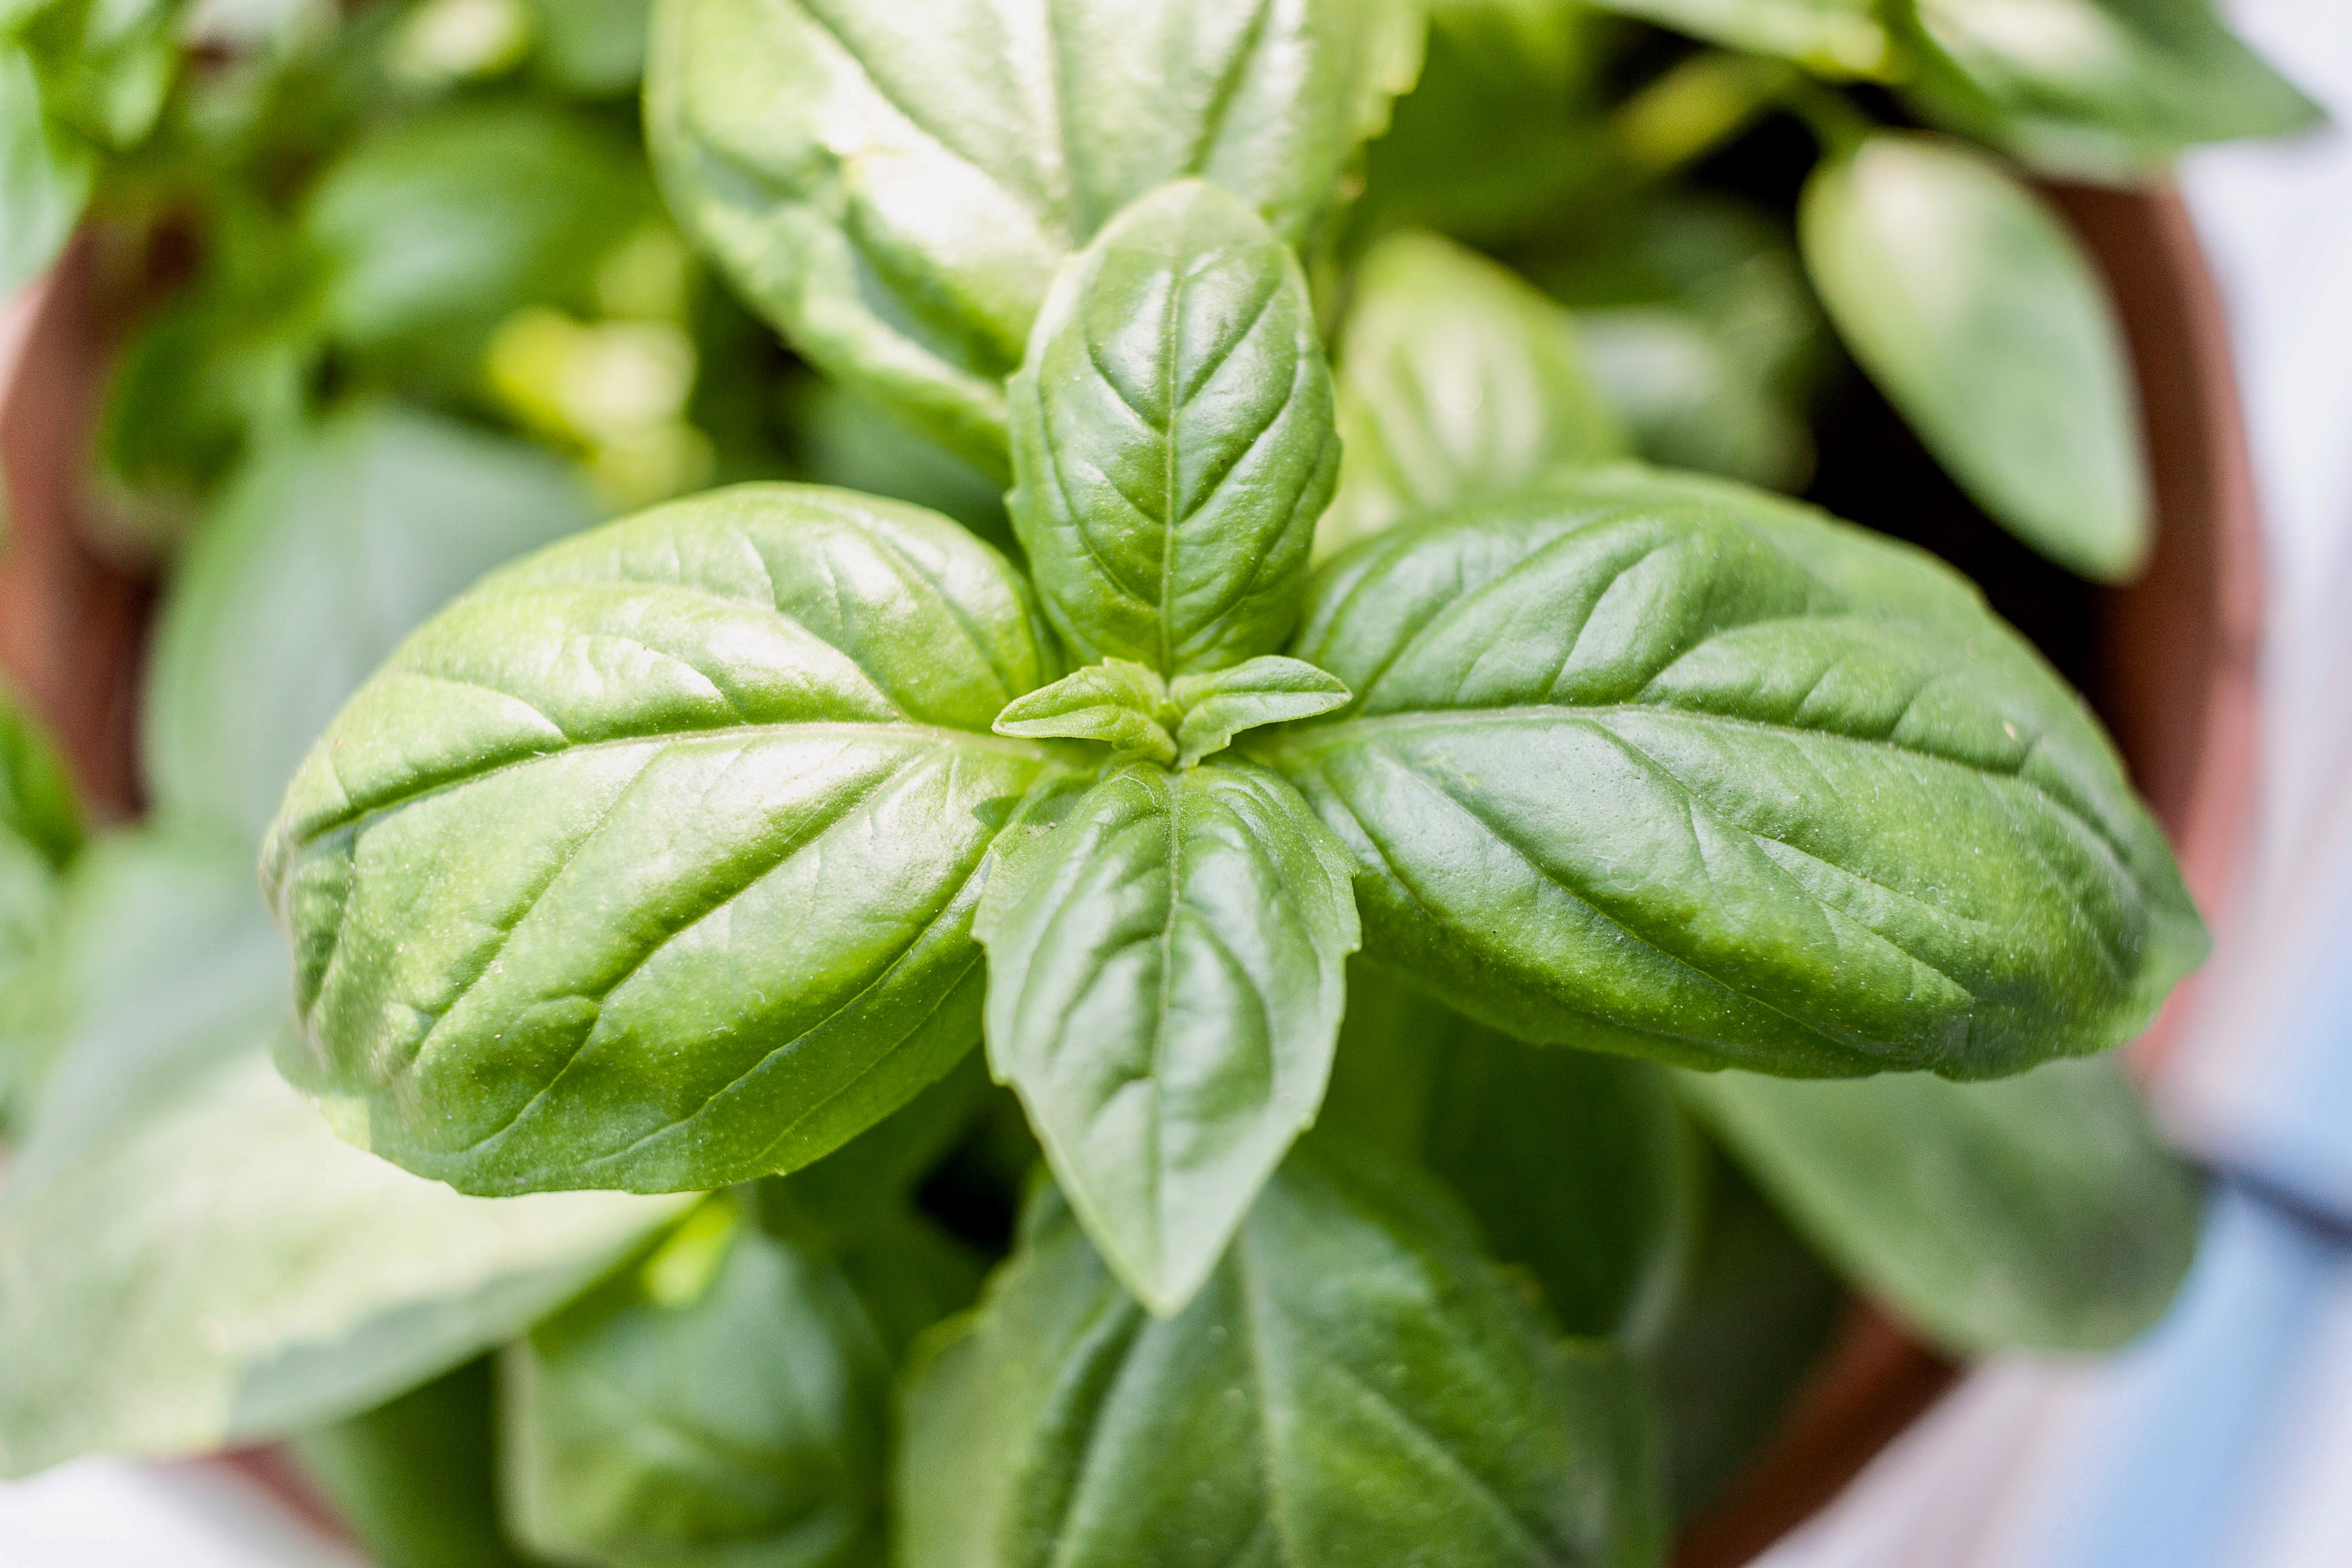 The best way to repot your Basil plant